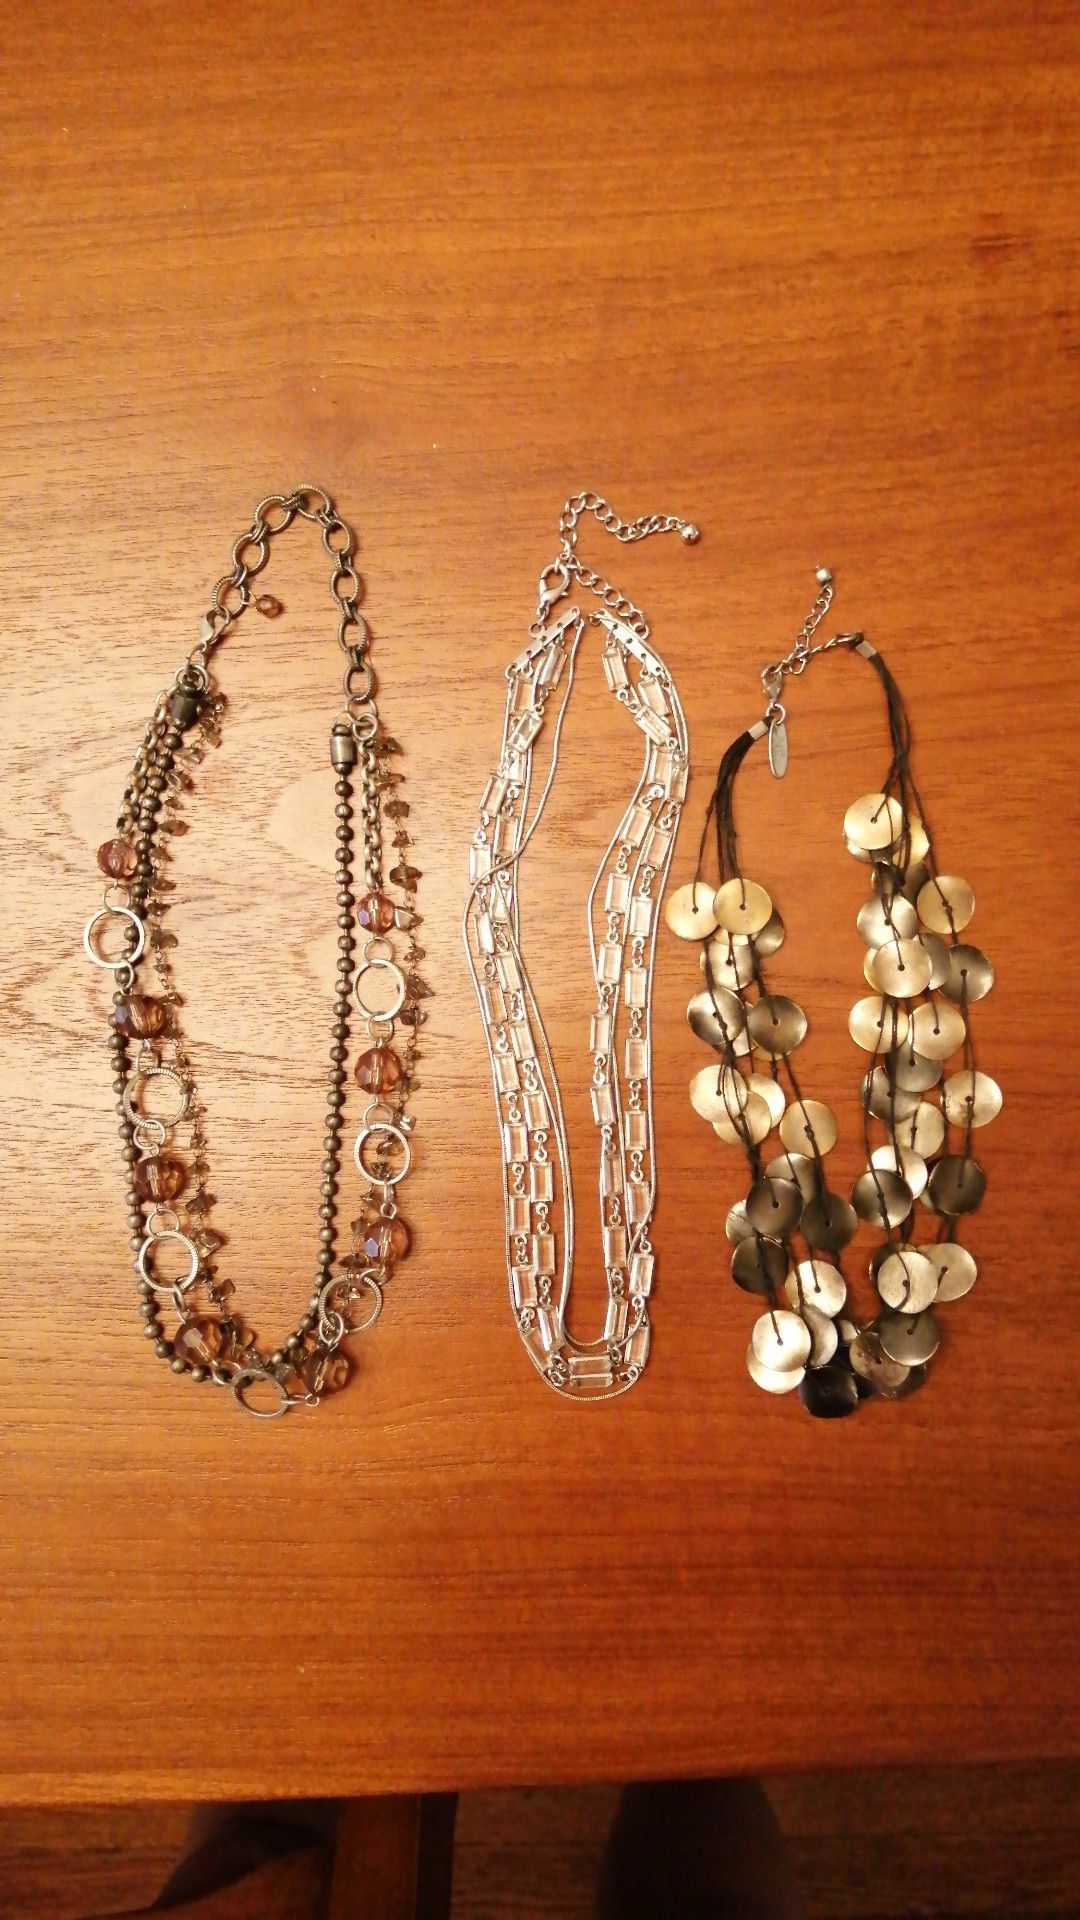 Black / grey / silver necklaces - for everyday wear and going out!